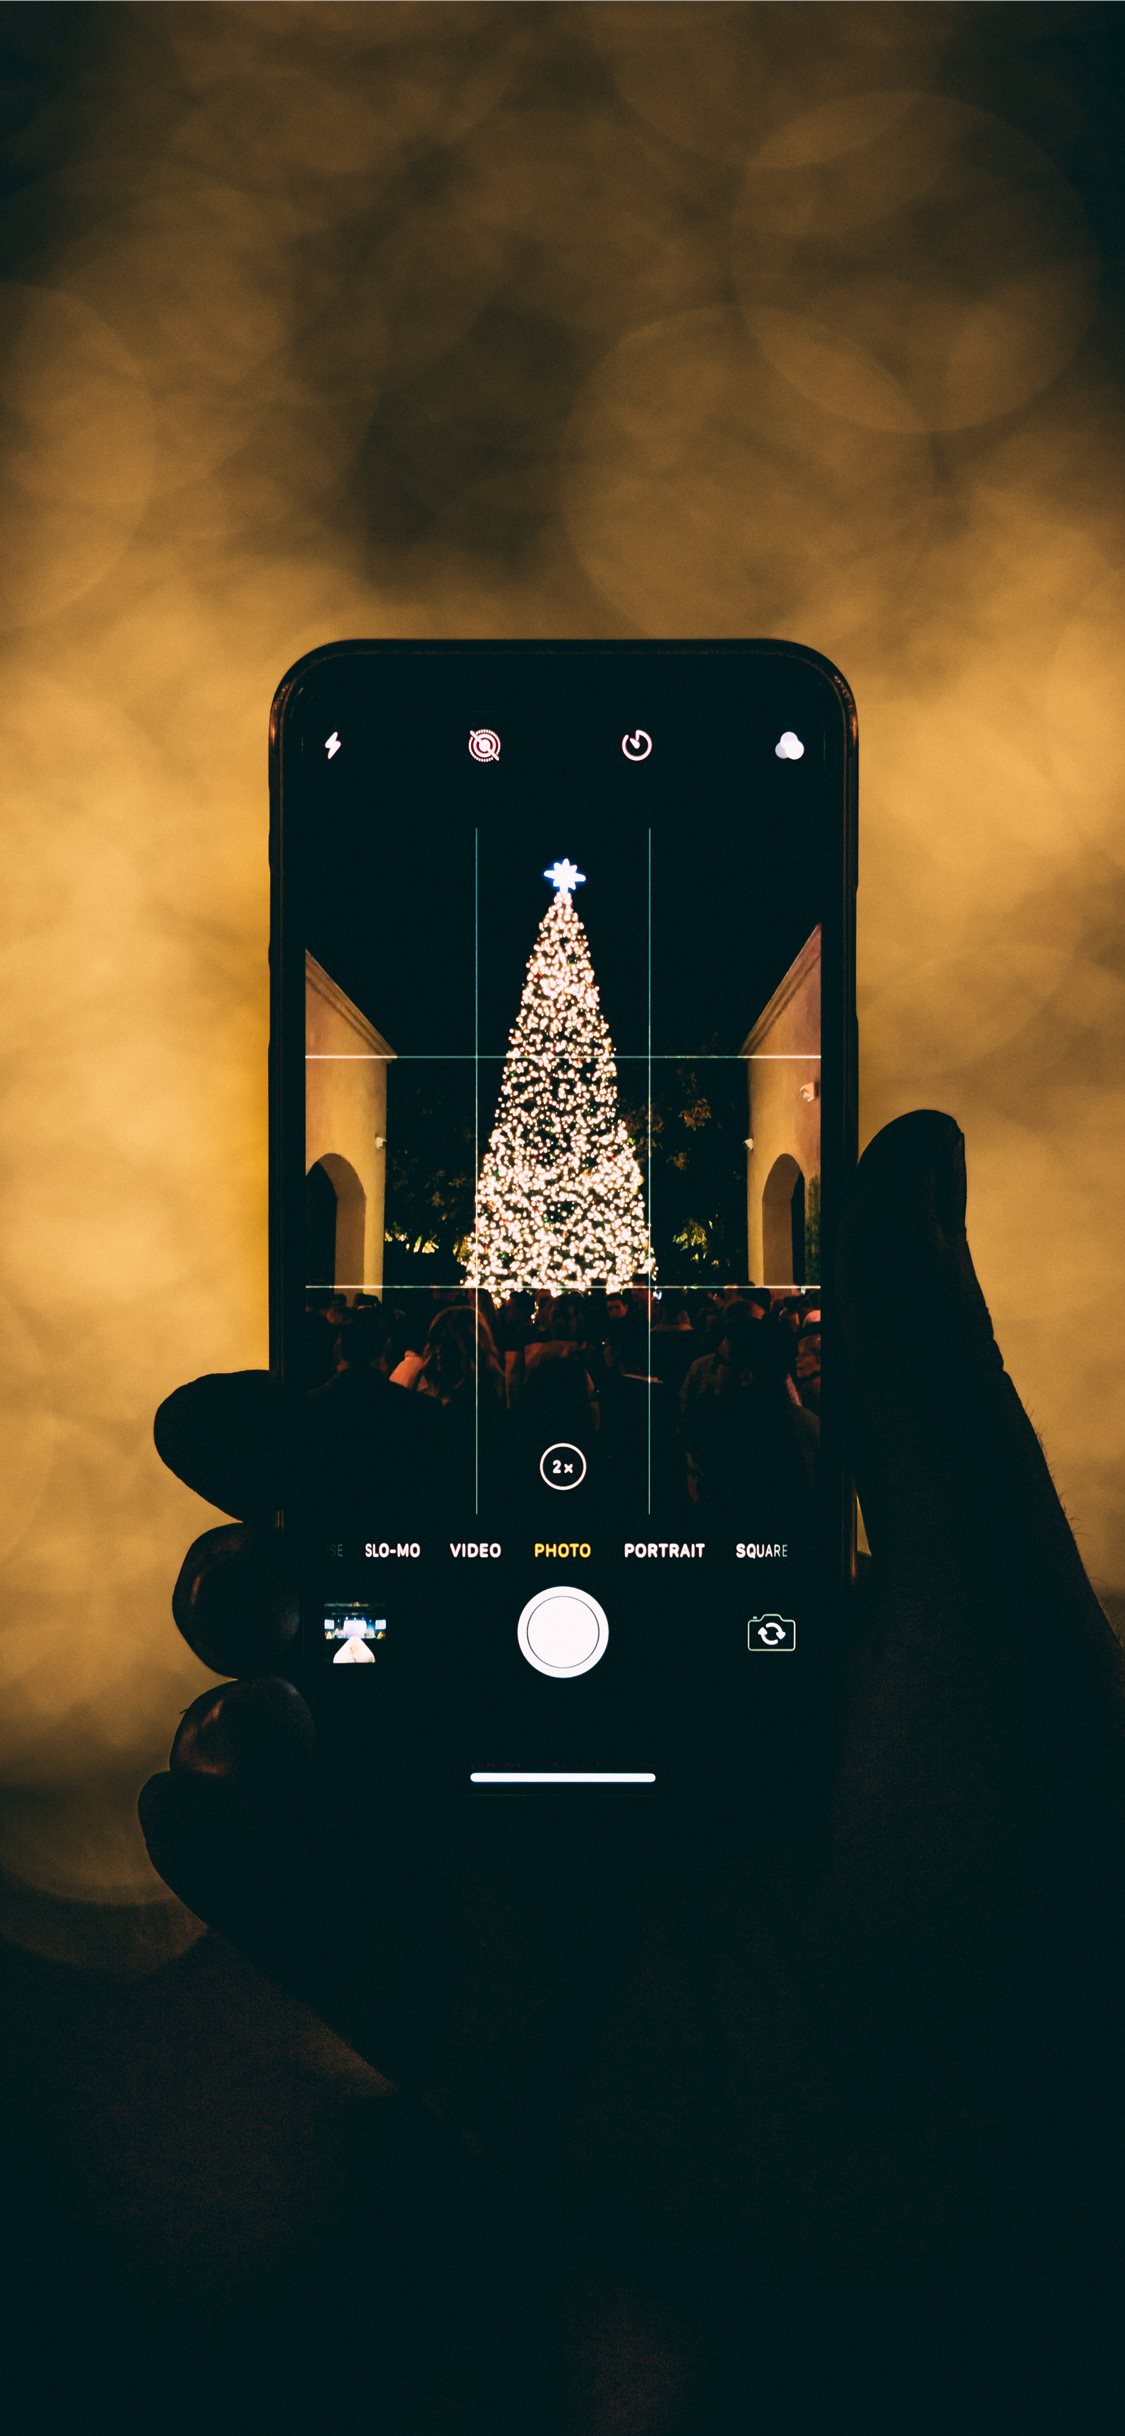 Iphone X Christmas Photography - HD Wallpaper 